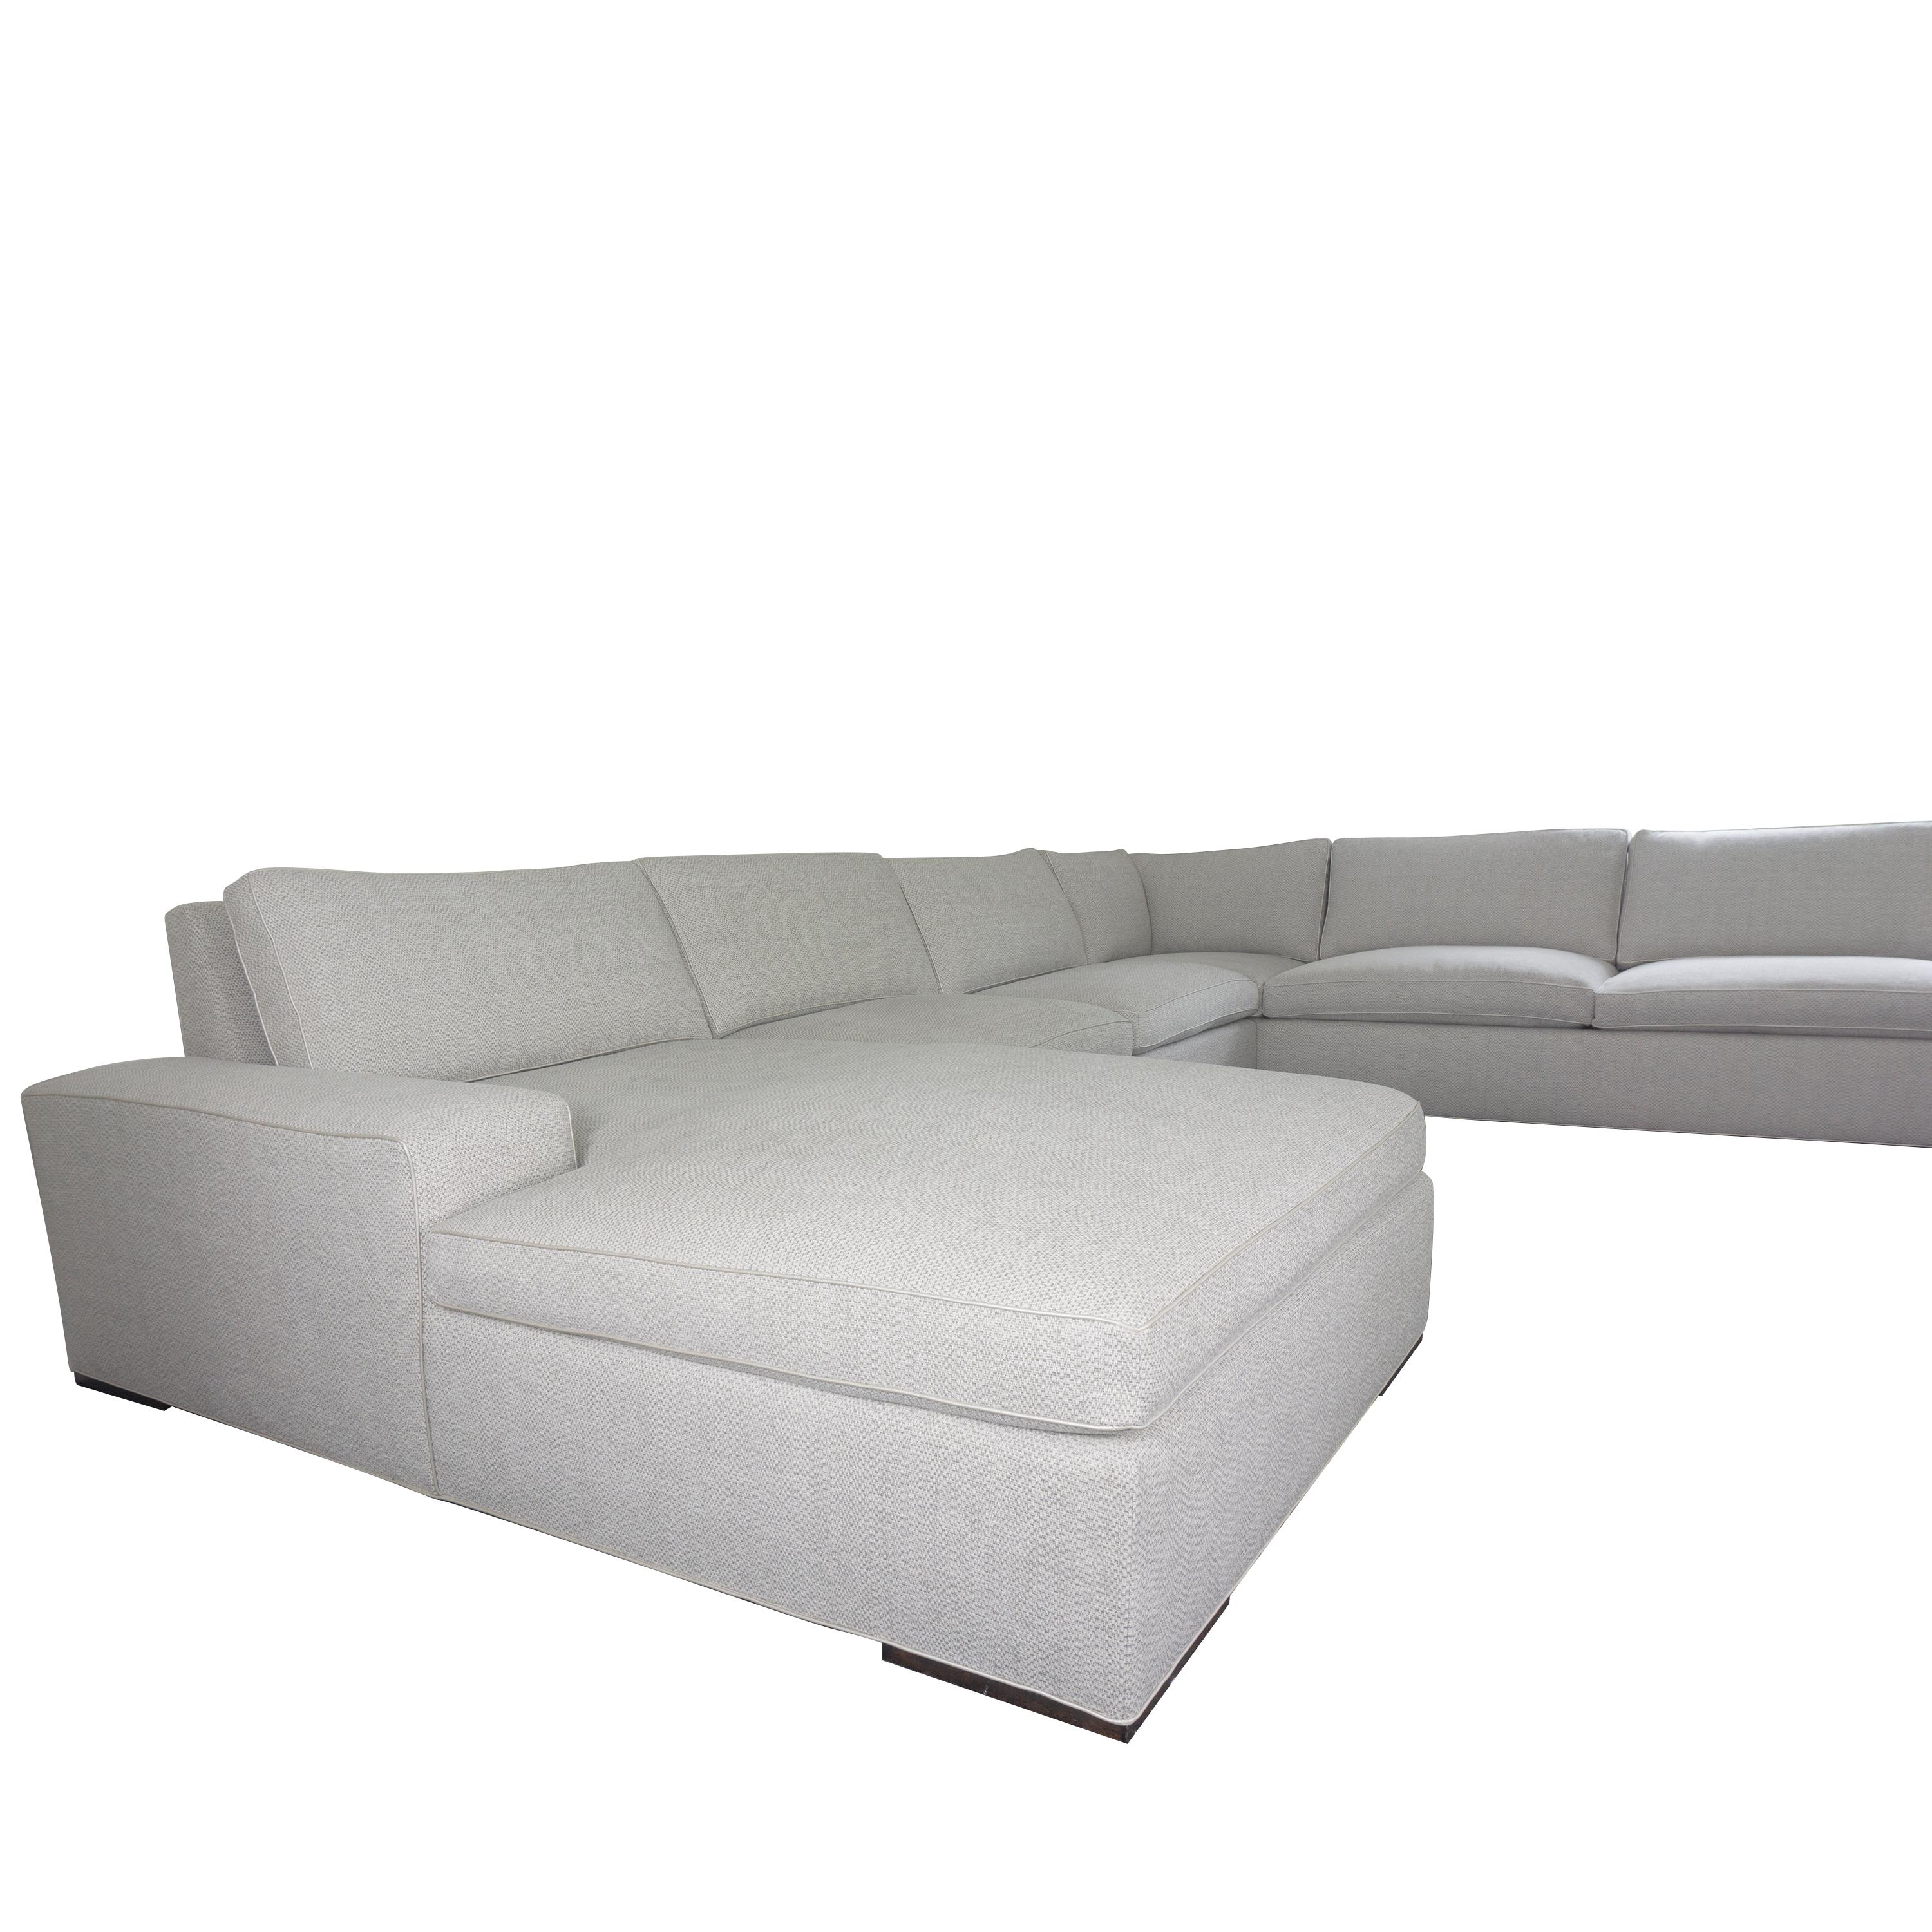 American Modern Square Arm Sectional Sofa with Chaise For Sale